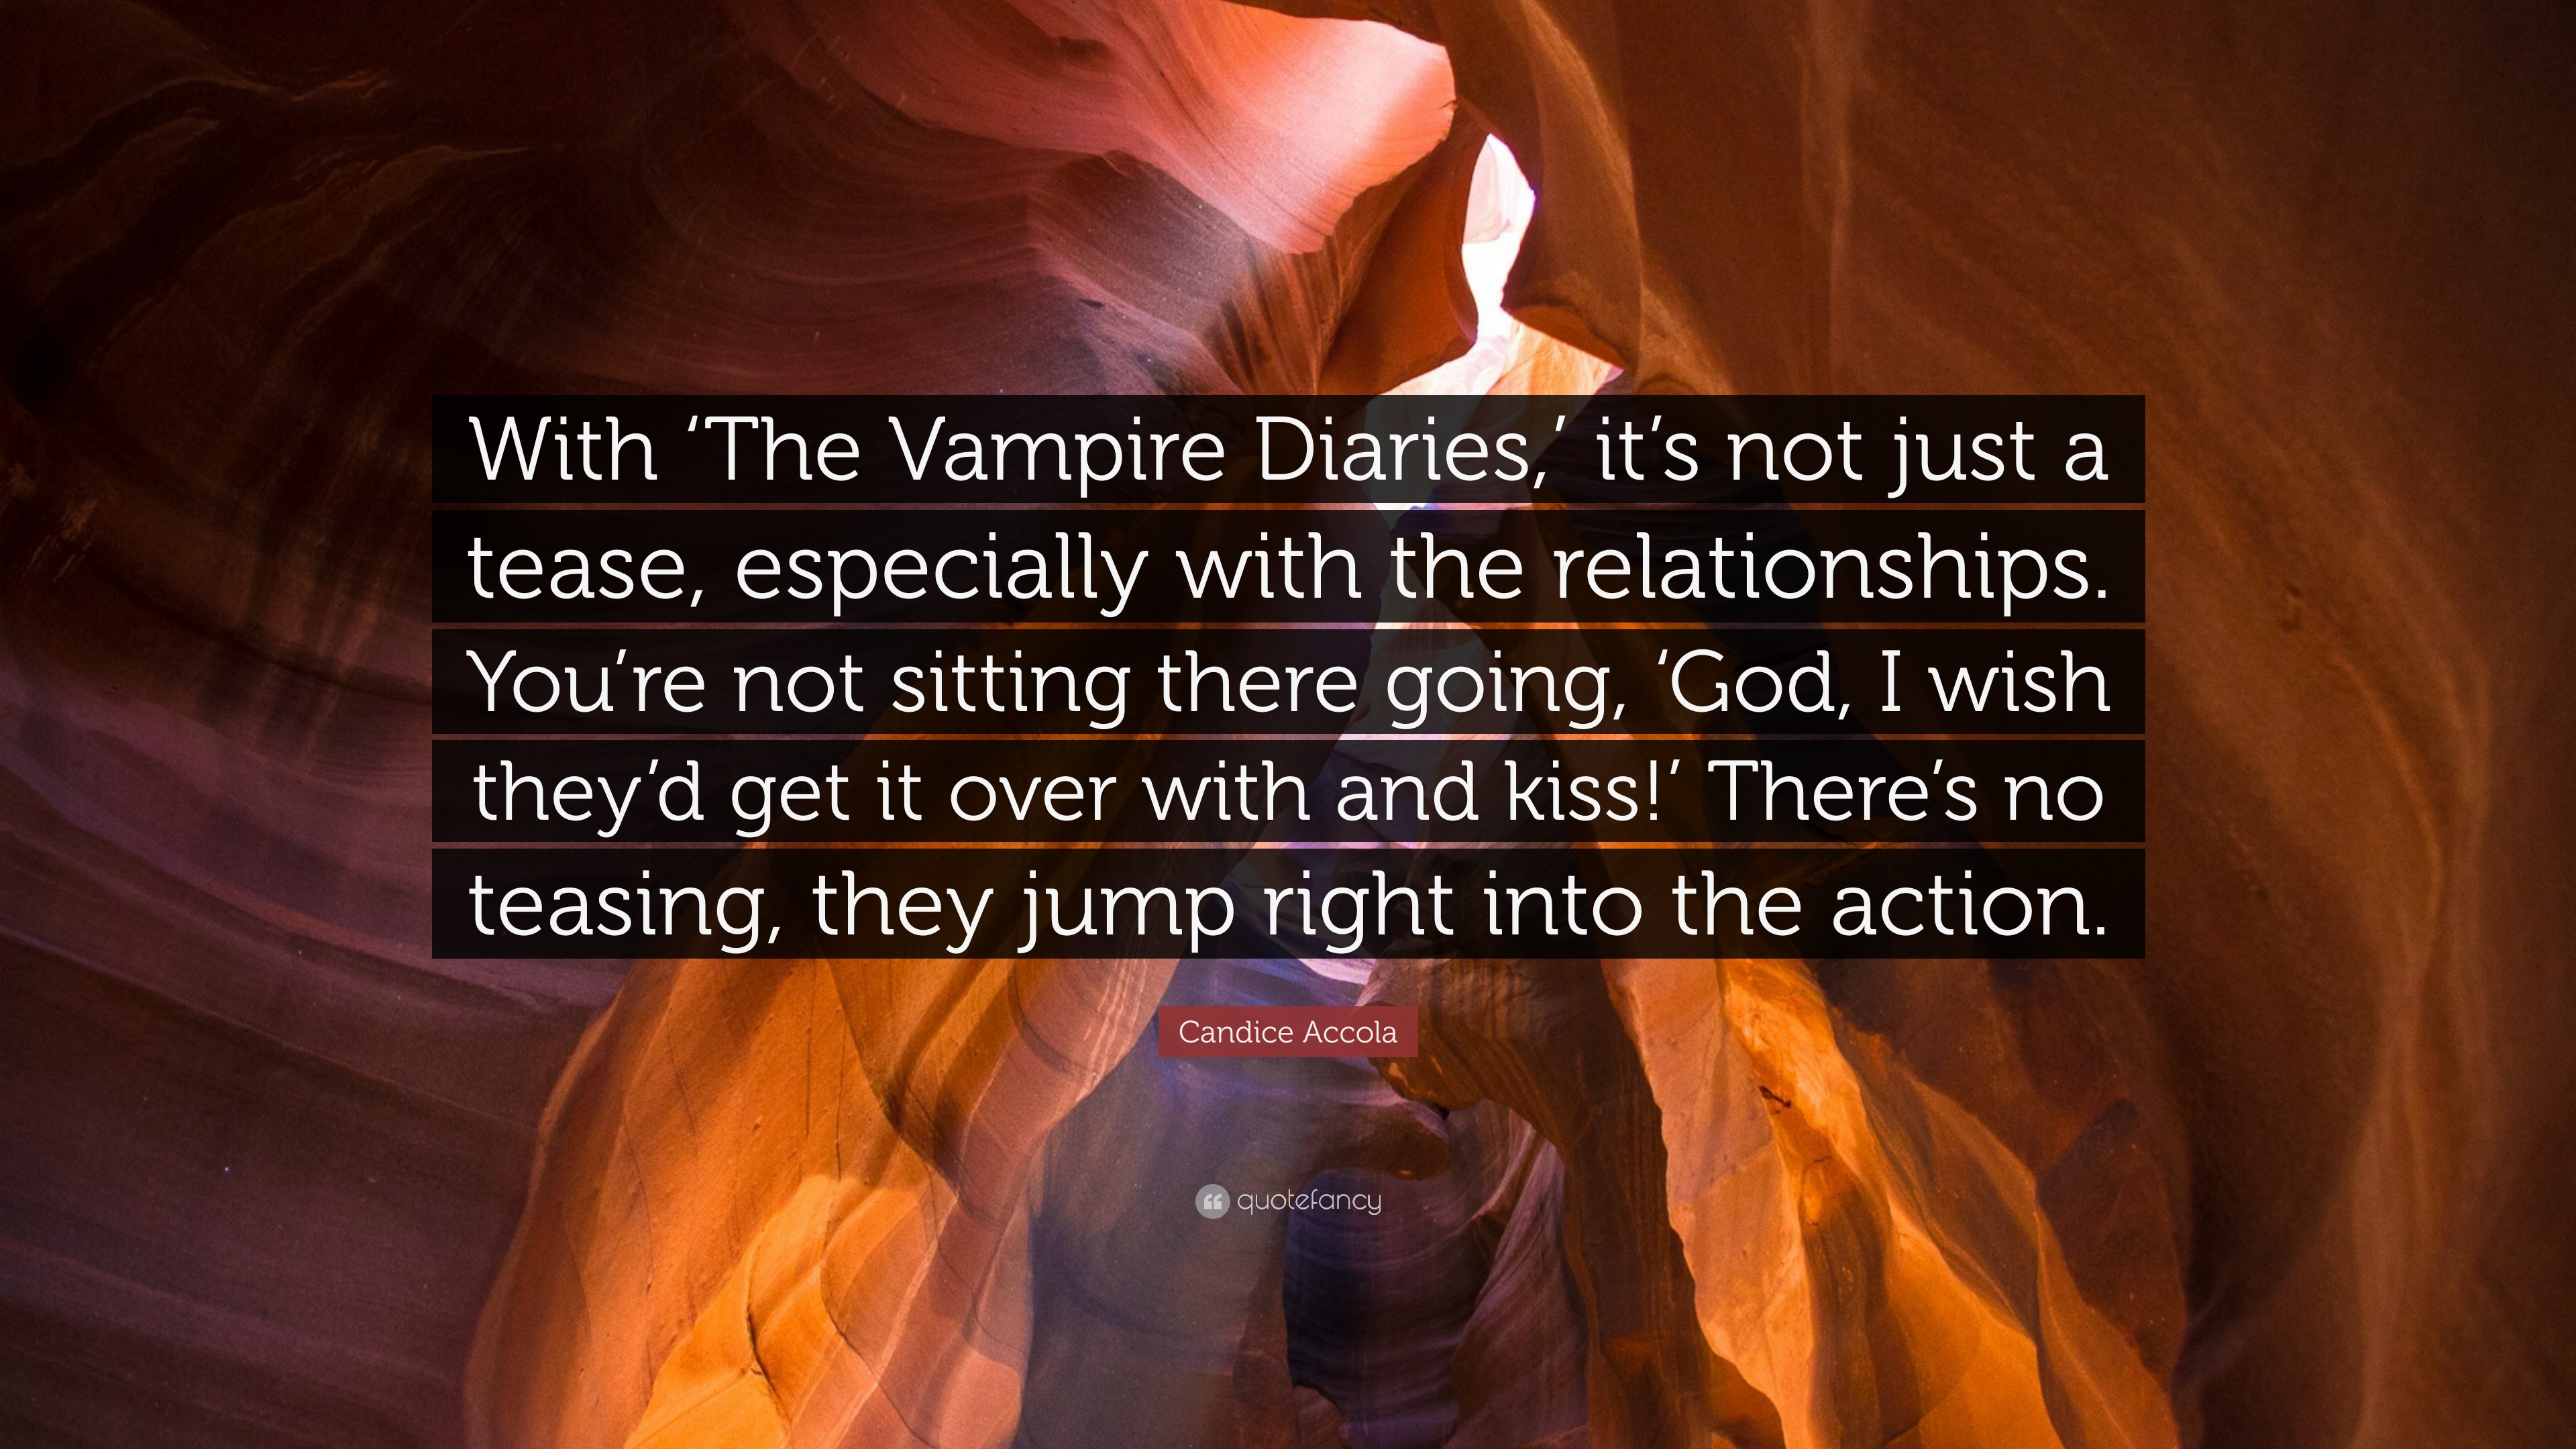 Candice Accola Quote: “With 'The Vampire Diaries, ' it's not